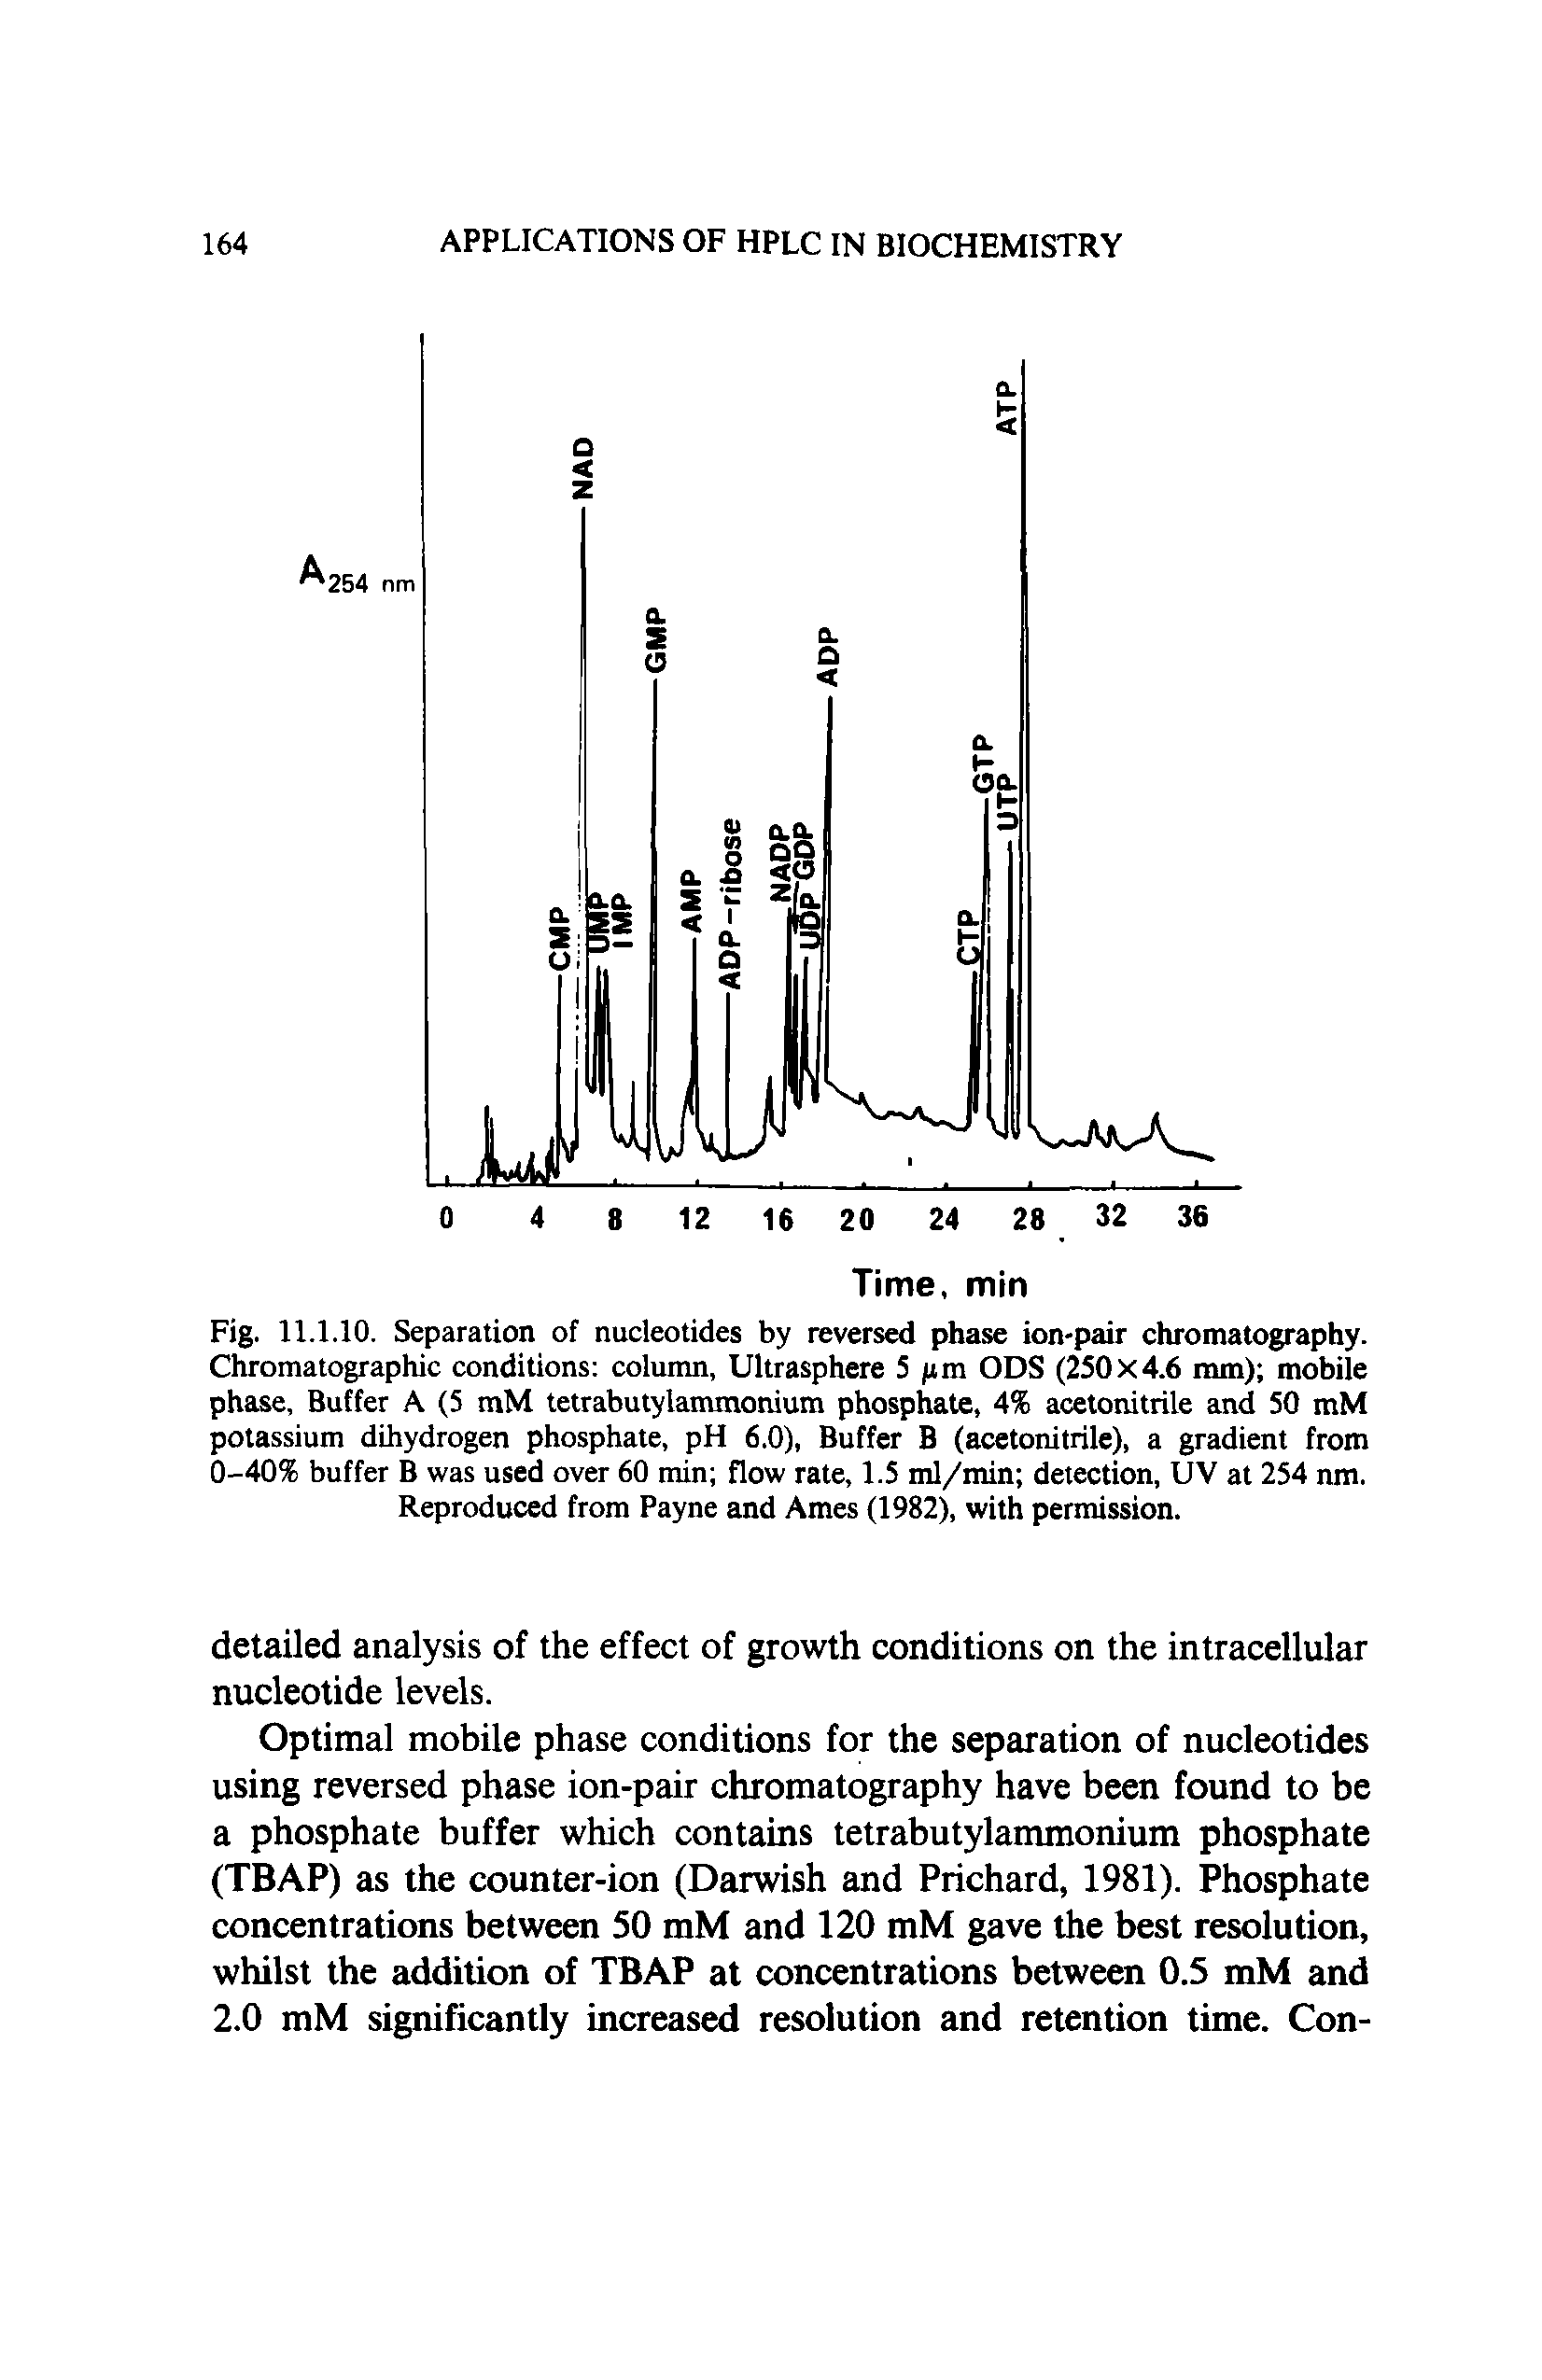 Fig. 11.1.10. Separation of nucleotides by reversed phase ion-pair chromatography. Chromatographic conditions column, Ultrasphere 5 (im ODS (250 x 4.6 mm) mobile phase, Buffer A (5 mM tetrabutylammonium phosphate, 4% acetonitrile and 50 mM potassium dihydrogen phosphate, pH 6.0), Buffer B (acetonitrile), a gradient from 0-40% buffer B was used over 60 min flow rate, 1.5 ml/min detection, UV at 254 nm. Reproduced from Payne and Ames (1982), with permission.